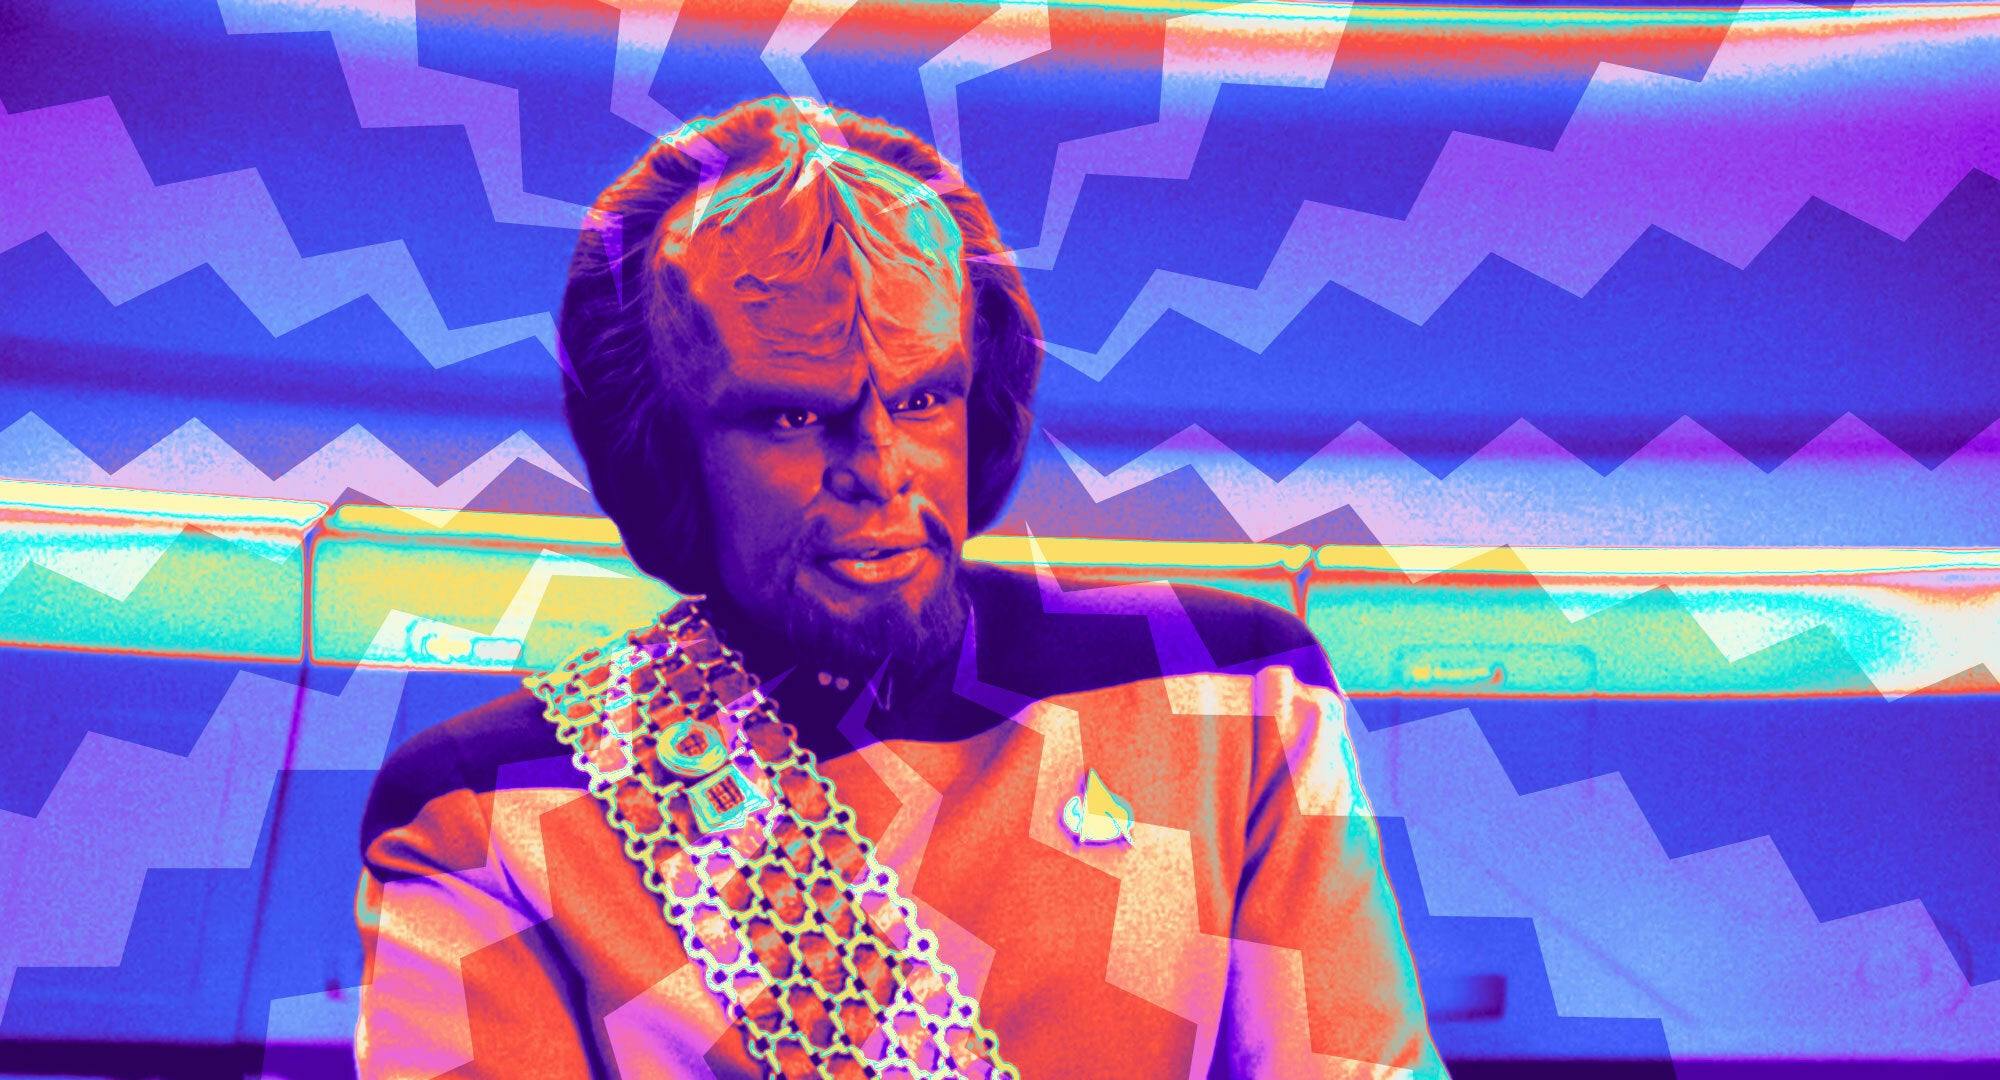 Illustrated banner featuring Worf